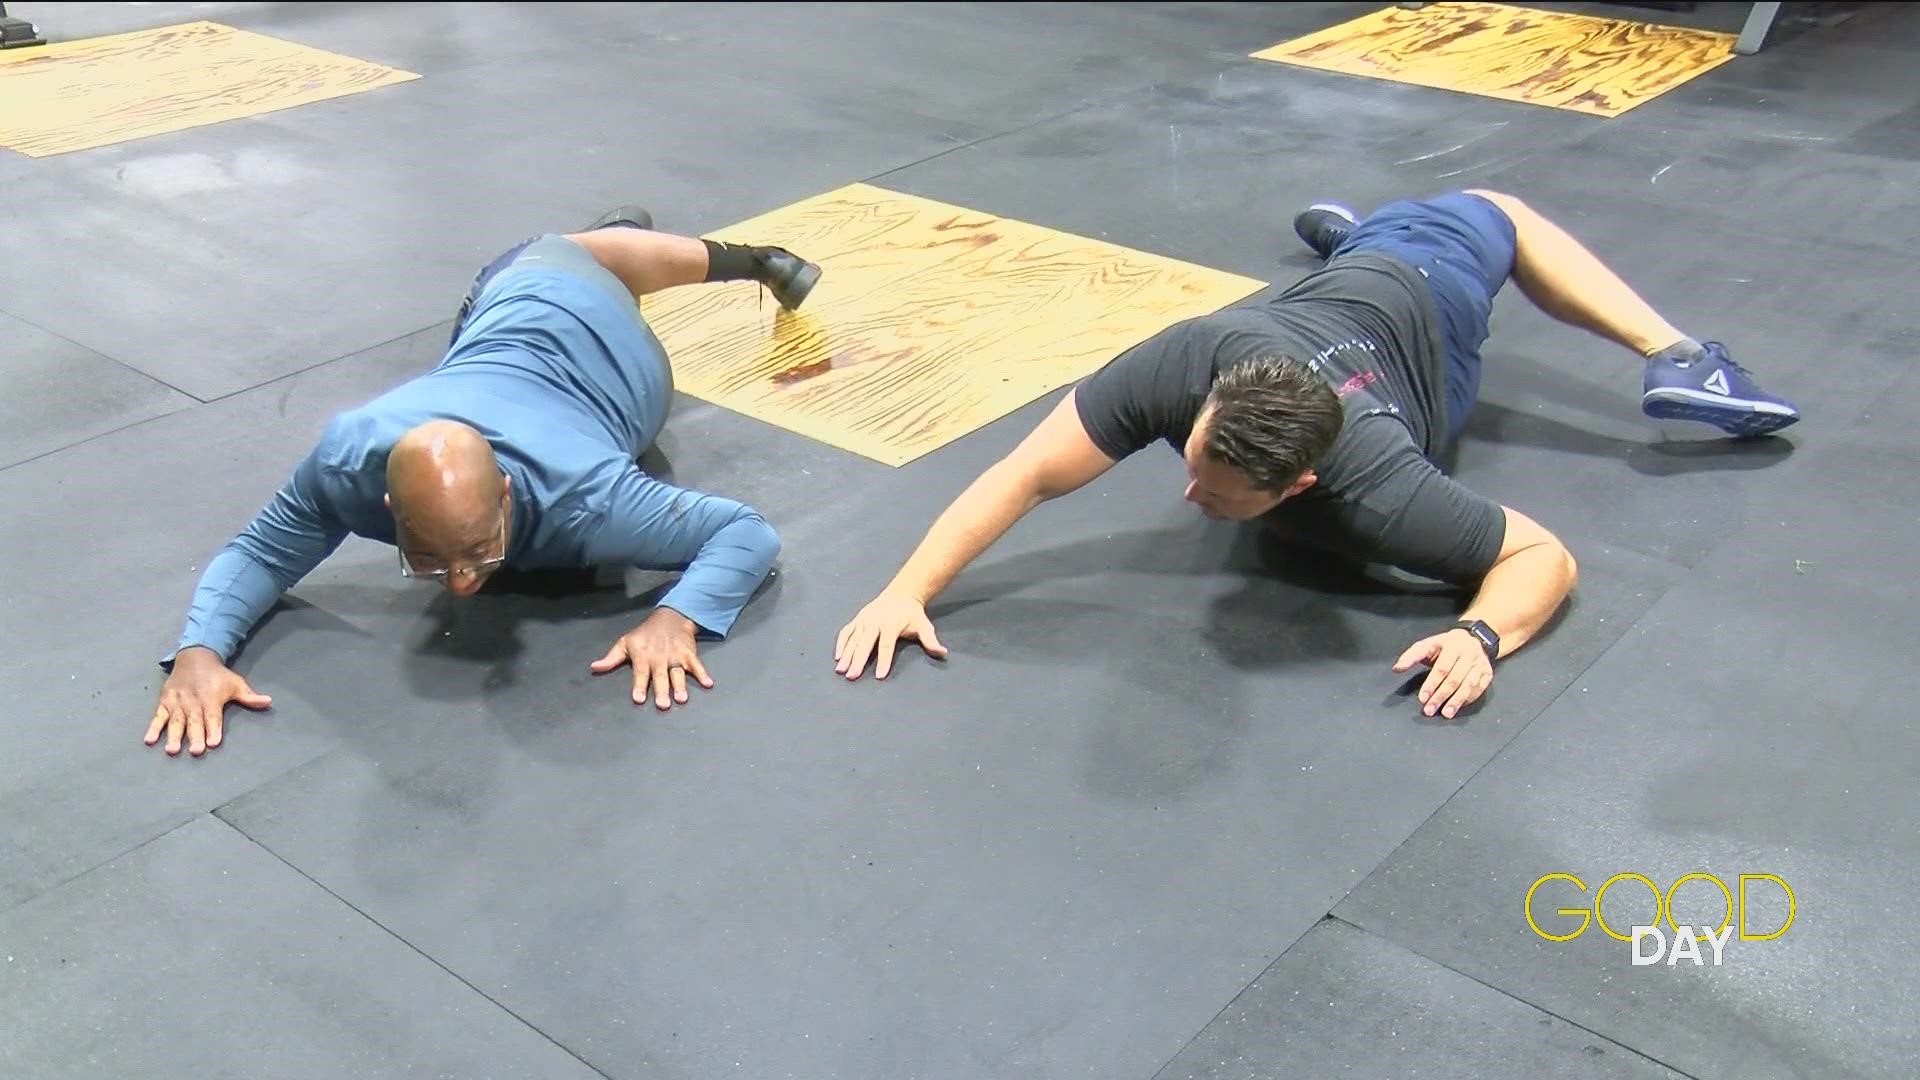 Taylor Raszka with Pillar Fitness showcases some post-workout stretches with Steven Jackson.